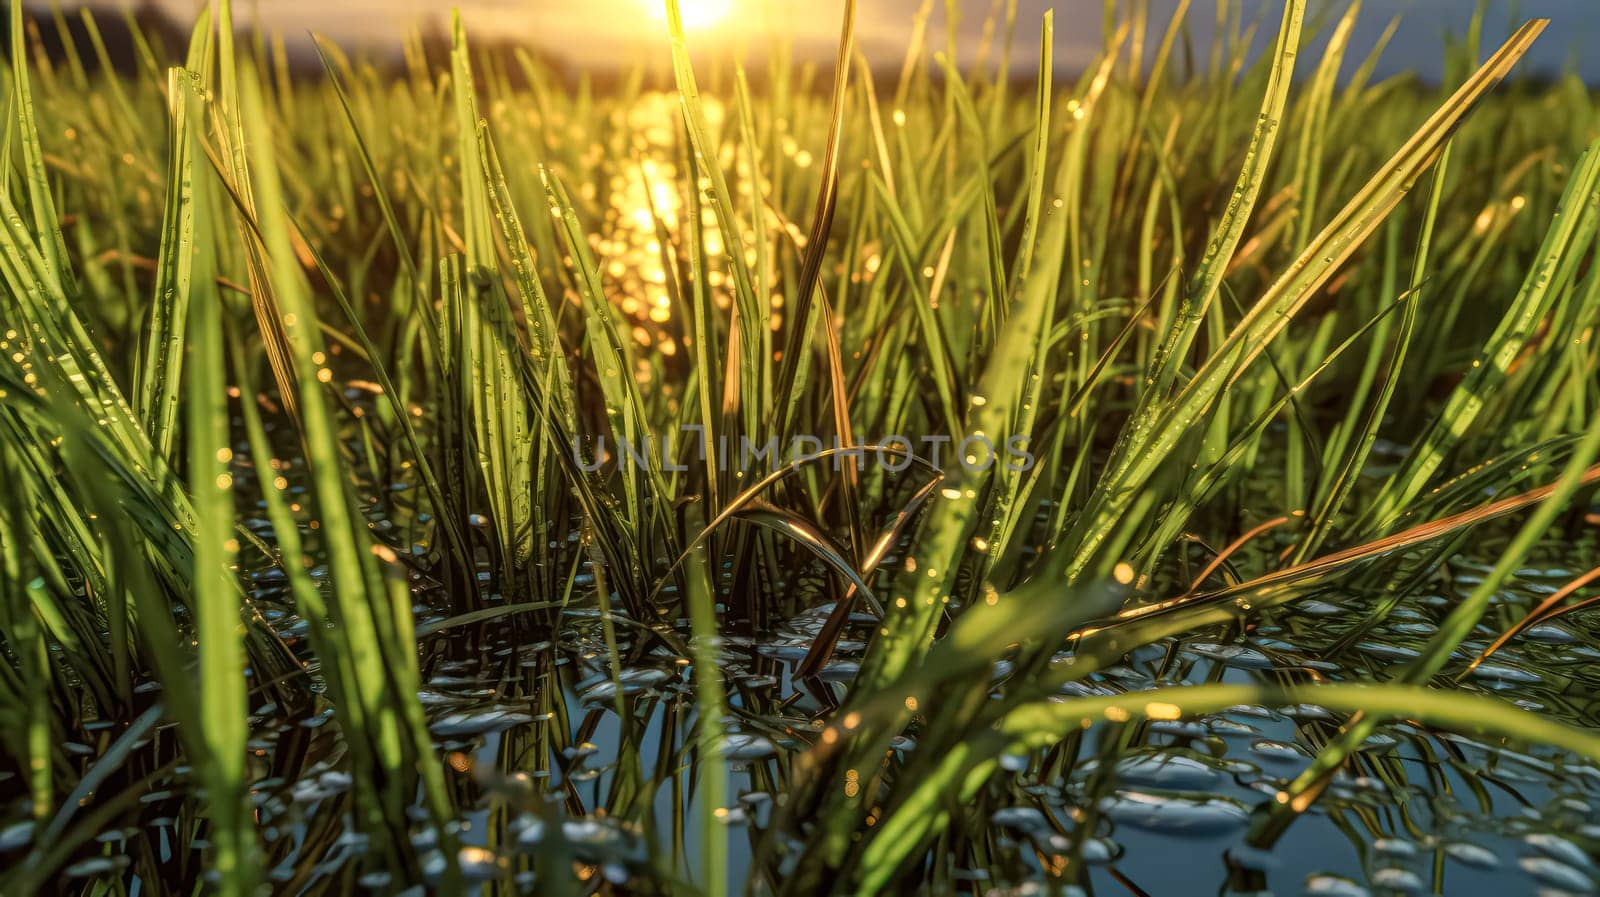 Immerse yourself in the purity of nature with this close up of lush green grass adorned with morning dew. A refreshing panorama capturing the essence of spring and summer.